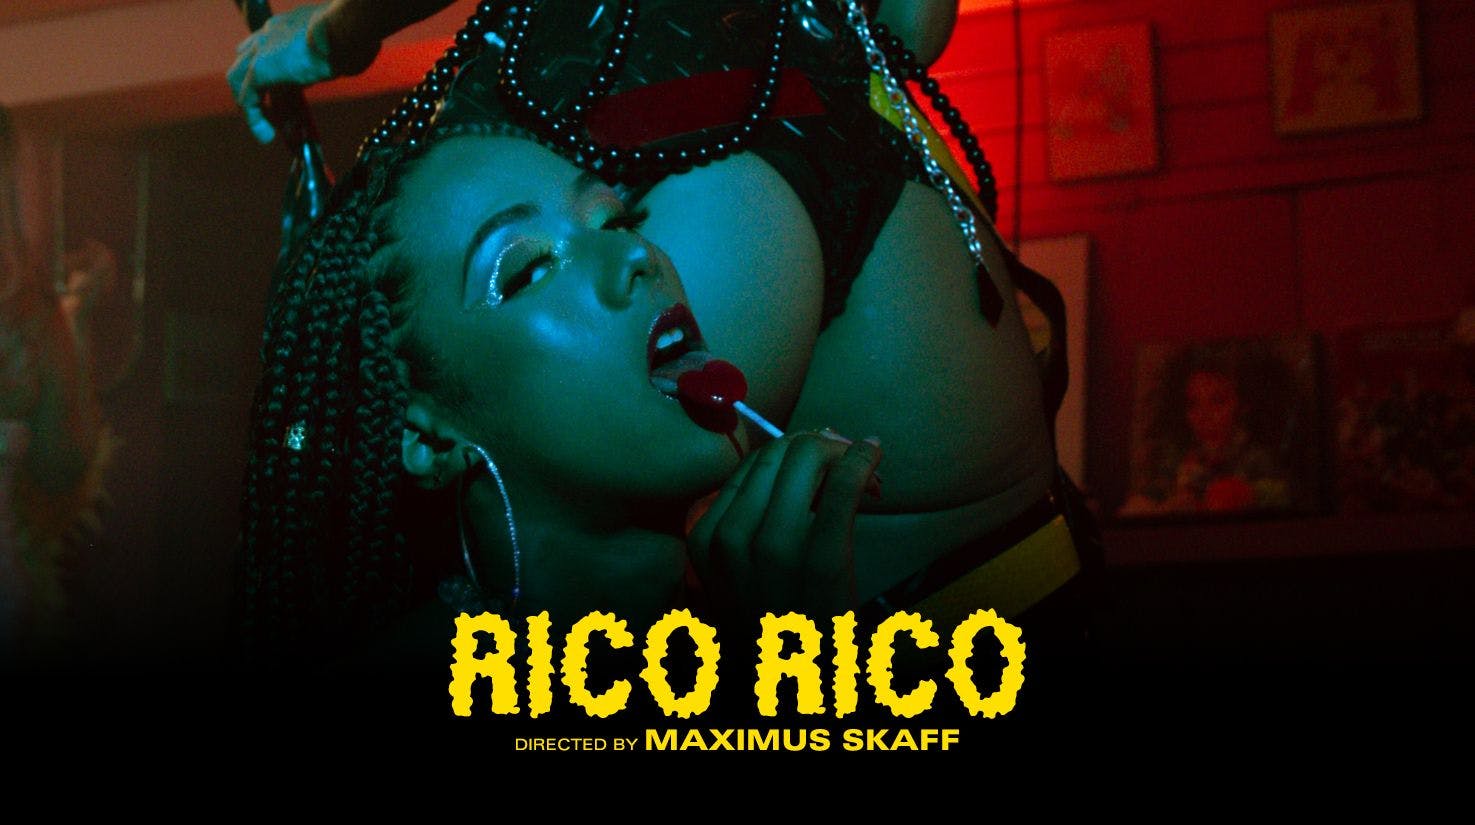 a queer porn film still from 'Rico Rico' on xconfessions by erika lust